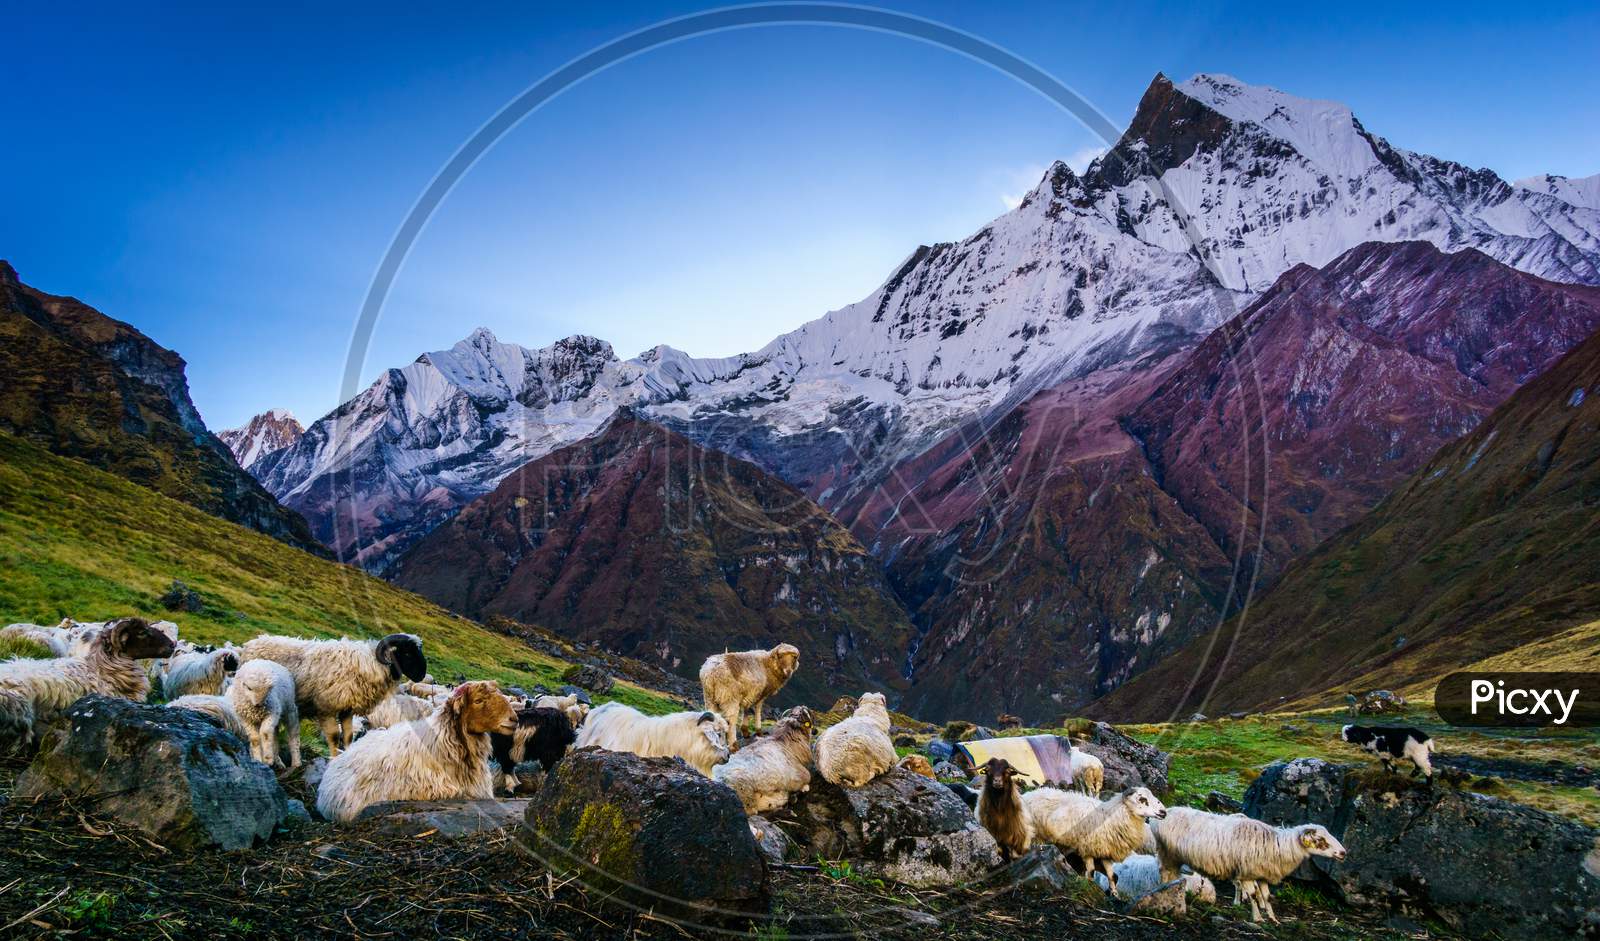 Herd of Sheep in the mountains